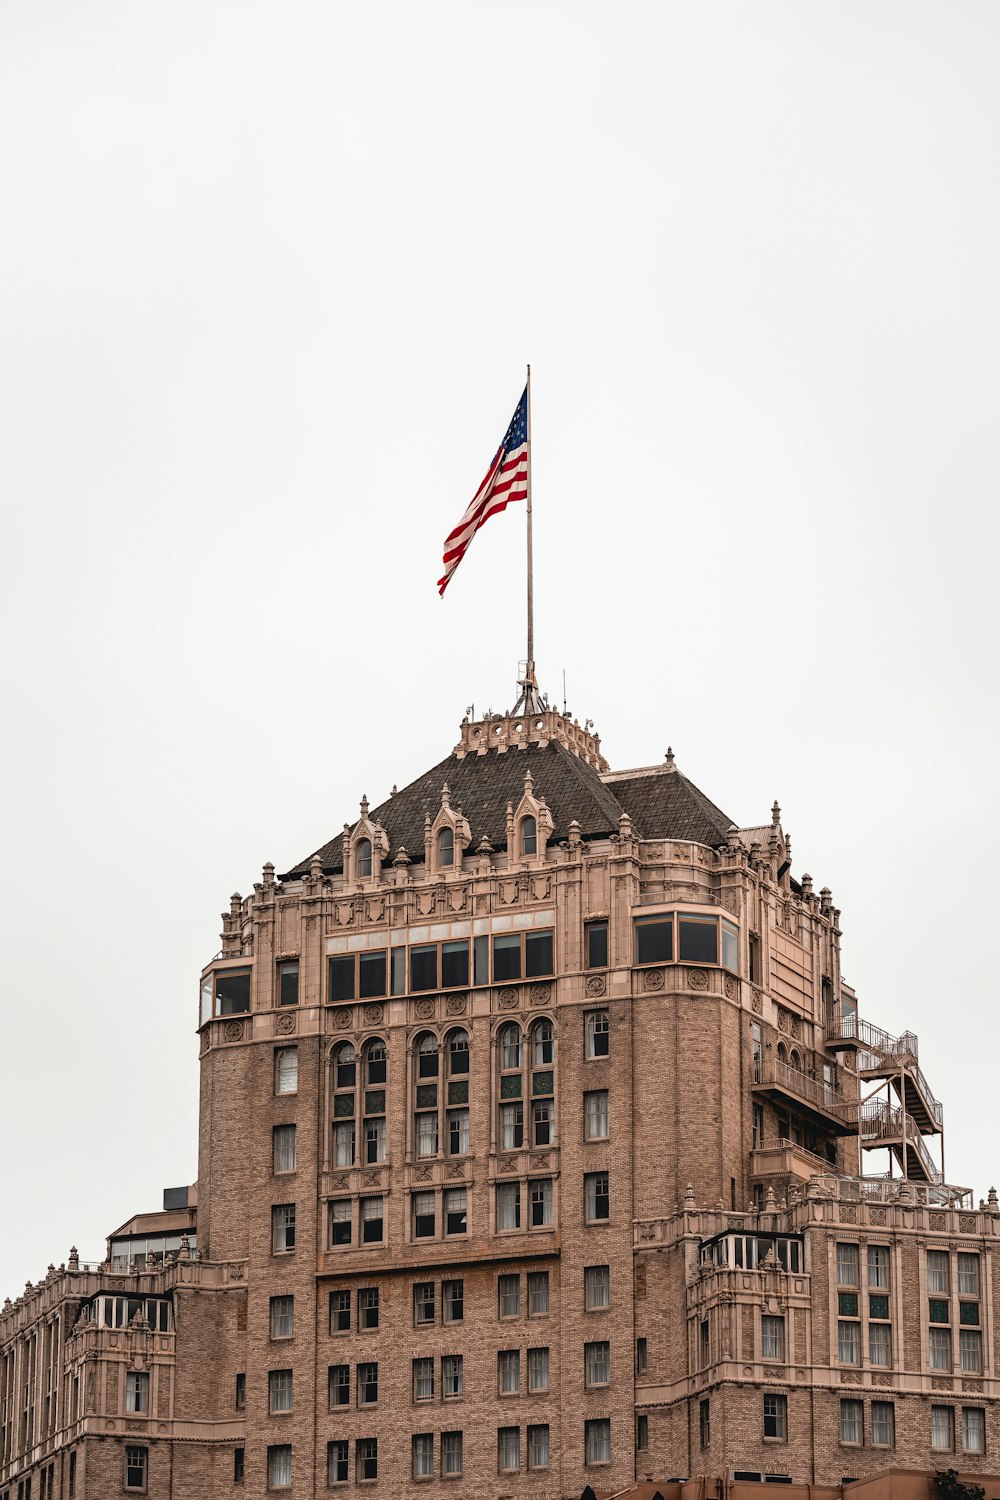 a flag on top of a building